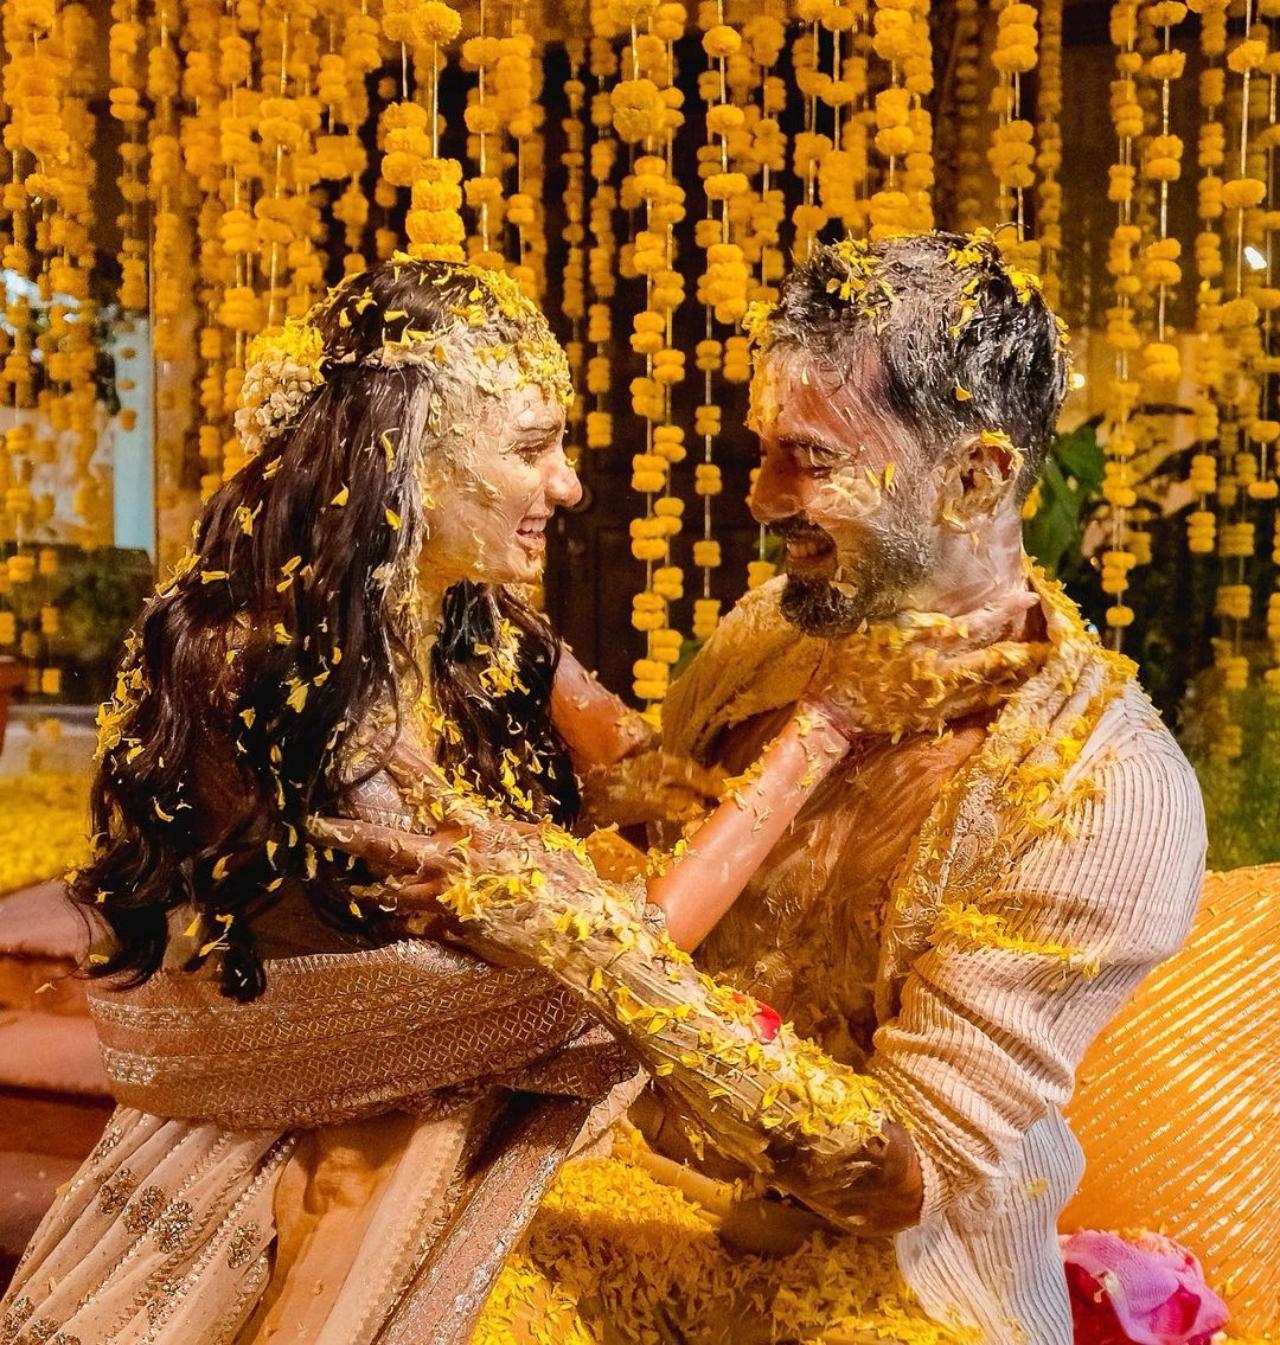 Athiya and KL Rahul also shared happy pictures of them applying haldi on each other. The two dated for a couple of years before tying the knot. They woudl often share pictures with each other from their trips together and on each other's birthdays on the gram